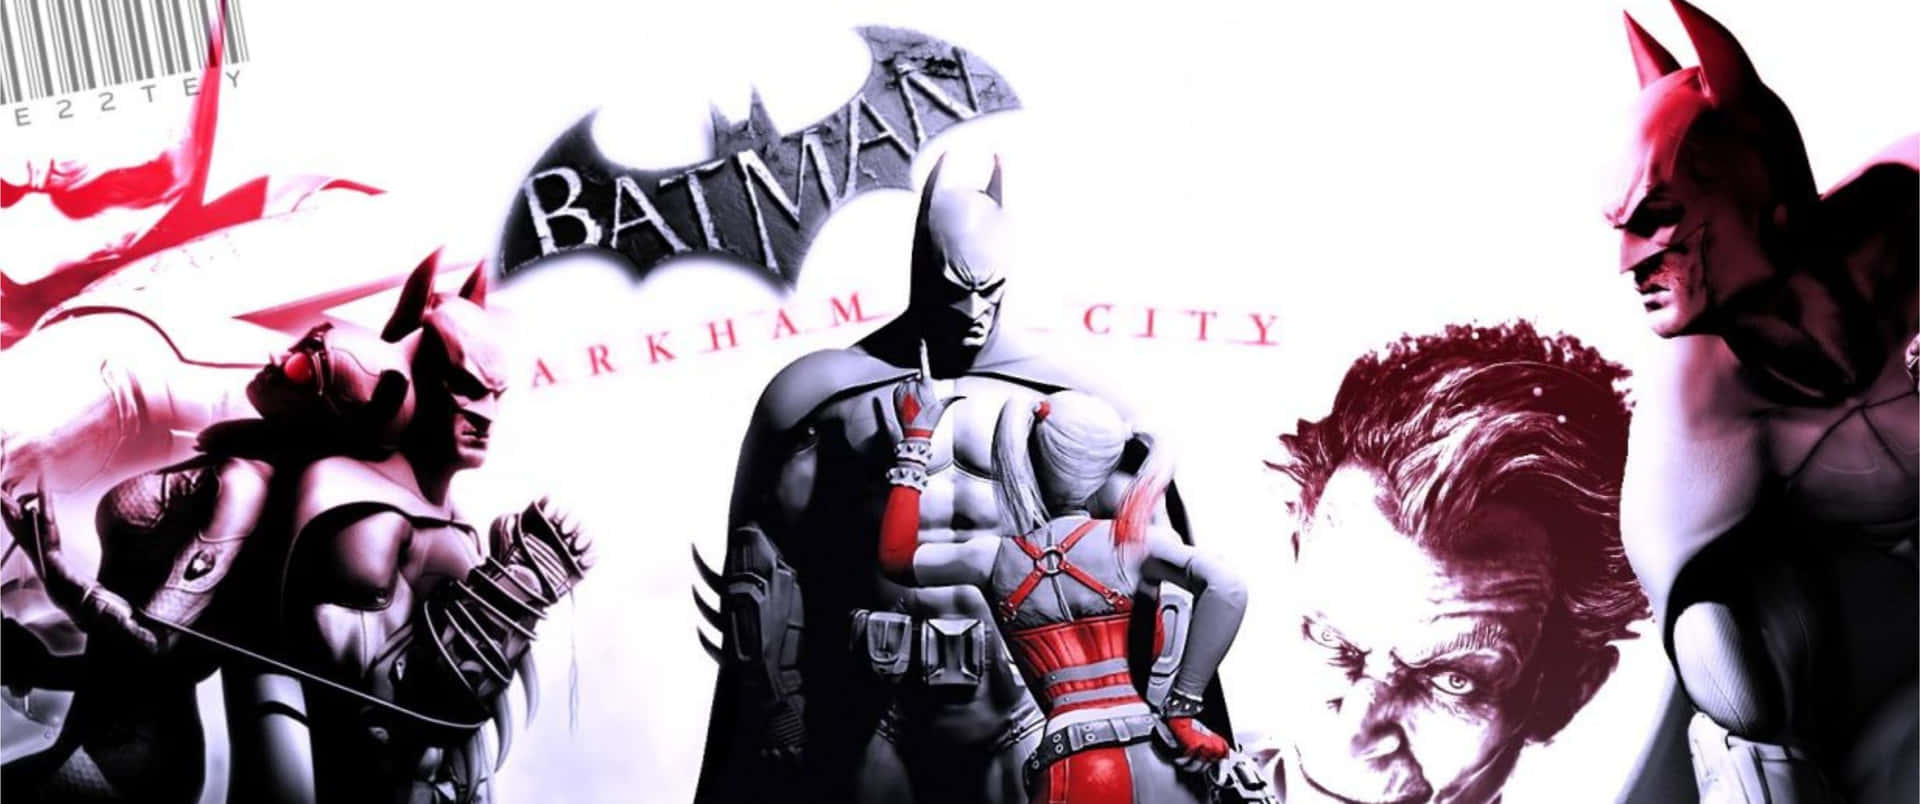 Batman stands ready in his Arkham City outfit.